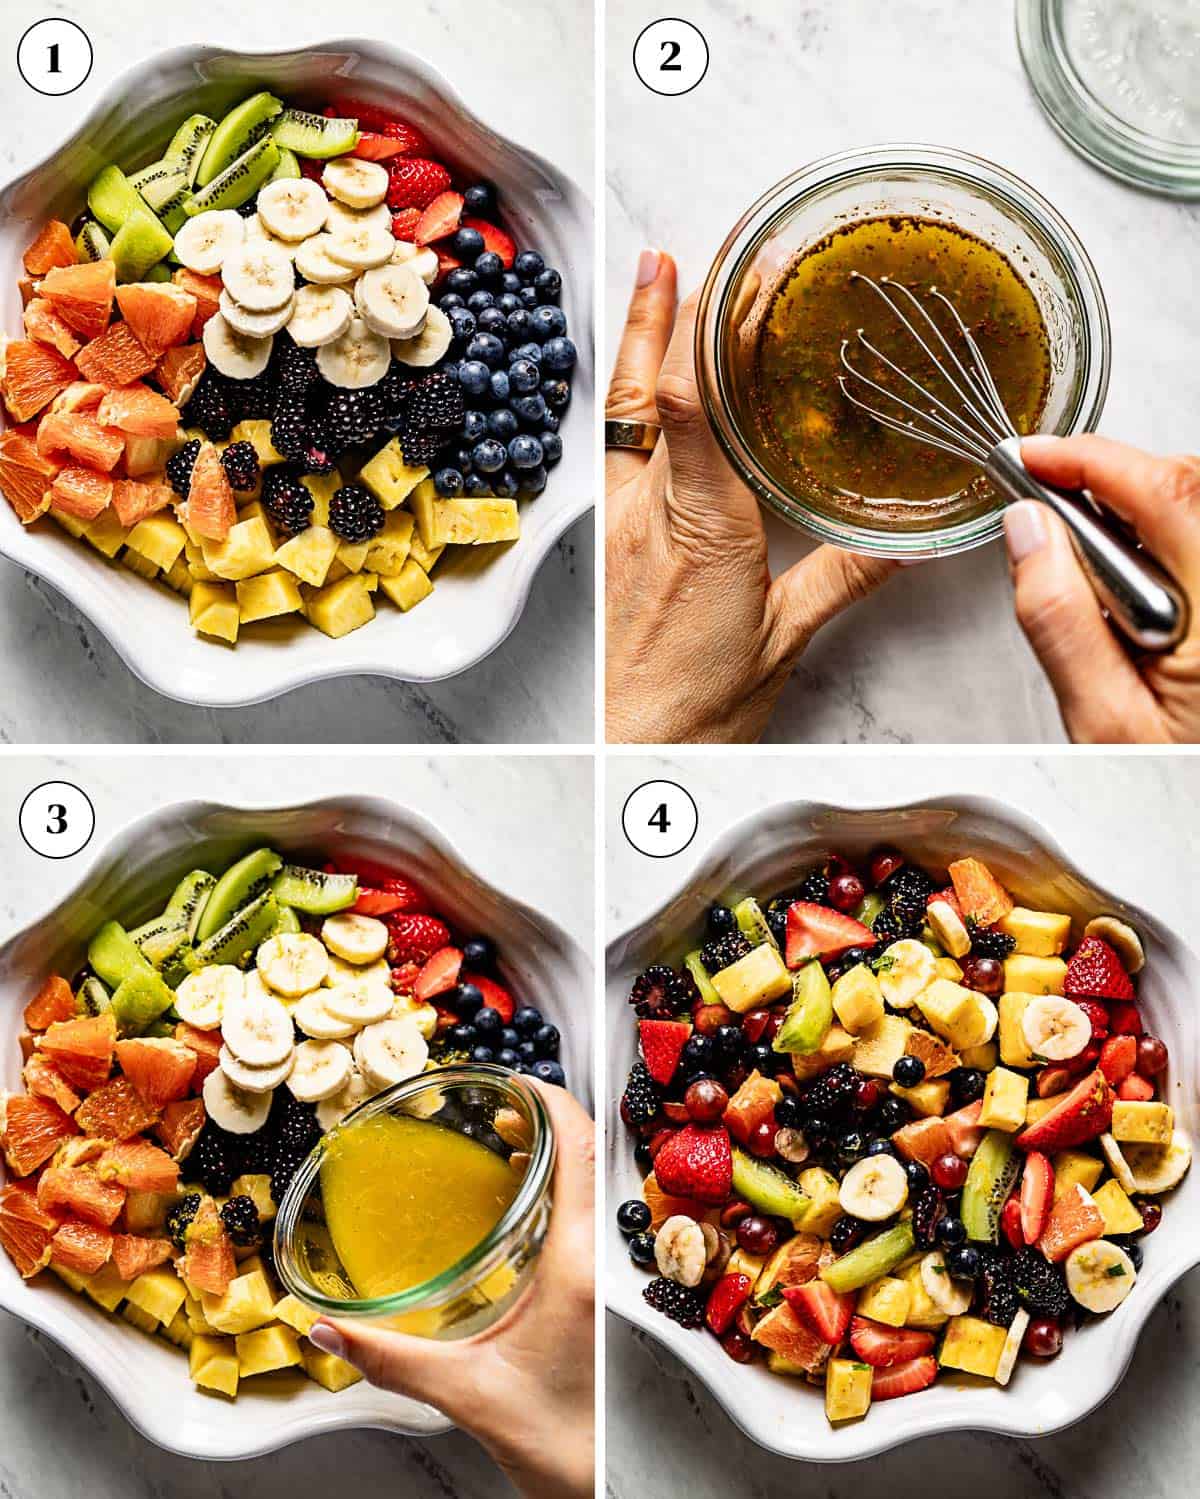 A collage of images showing how to make breakfast or brunch fruit salad recipe.